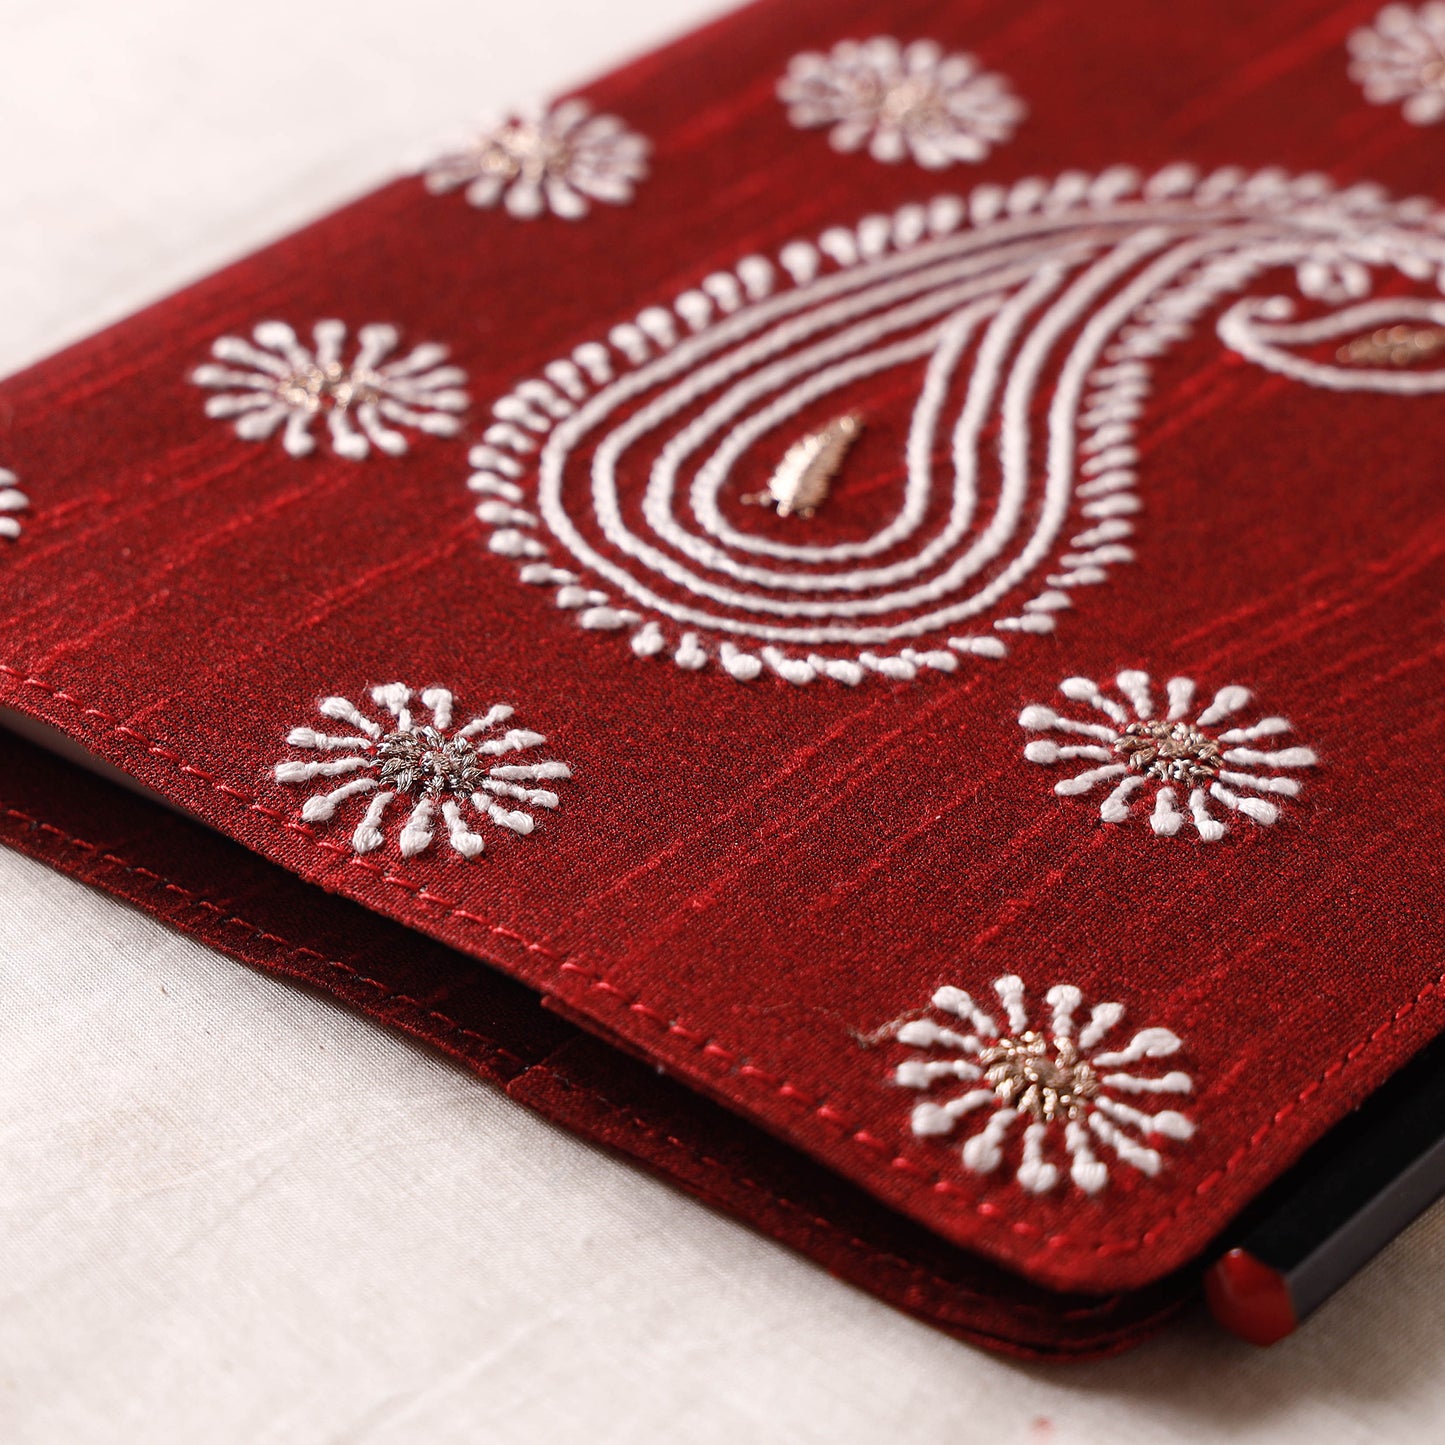 Lucknow Chikankari Hand Embroidery Silk Cover Notebook with Pencil (8 x 5.5 in)